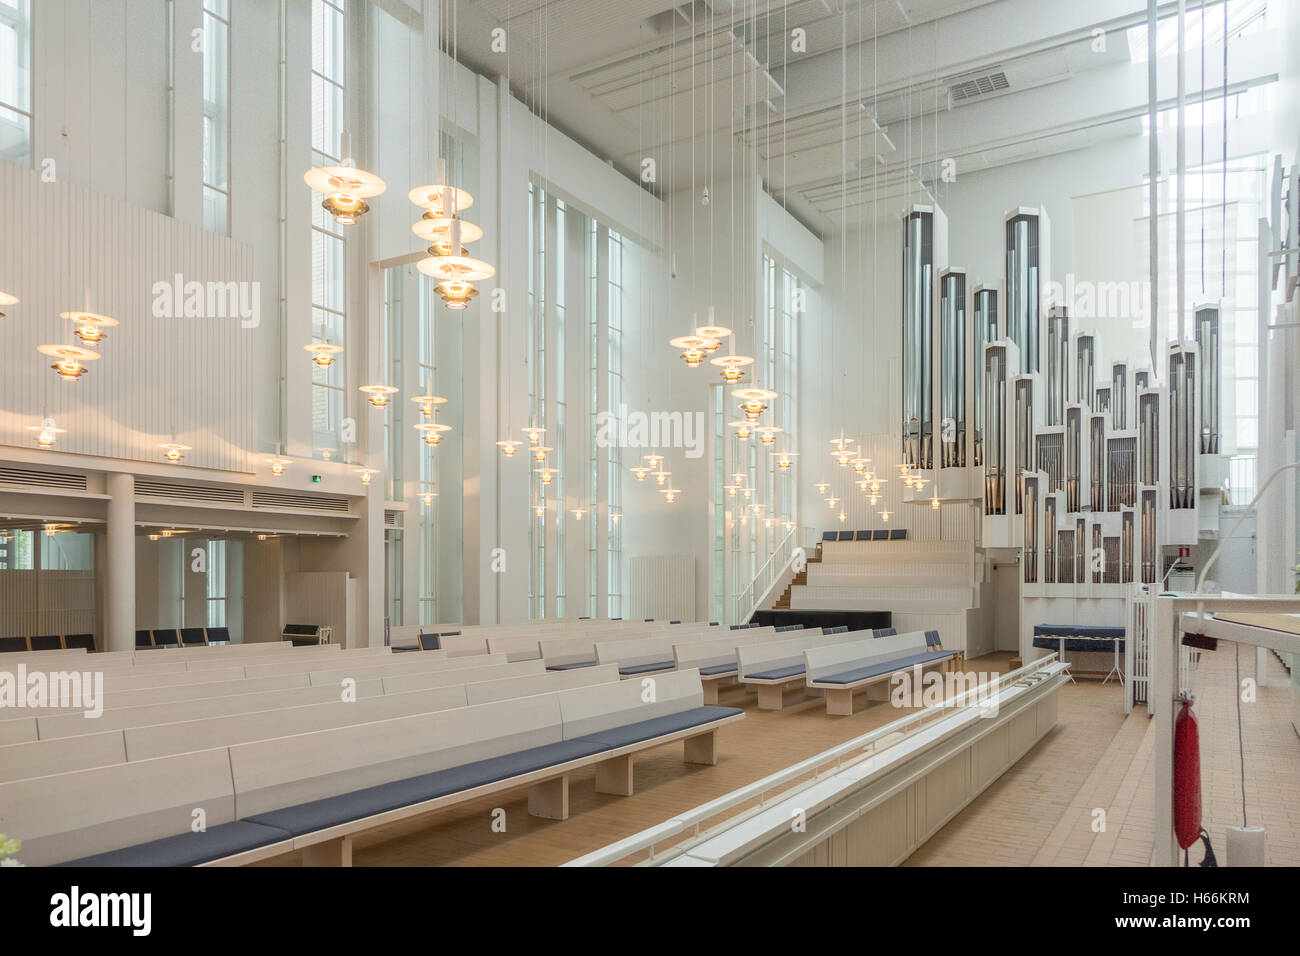 The white interior with strong vertical lines of Myyrmäki Church, Vantaa, Finland, showing organ. Stock Photo